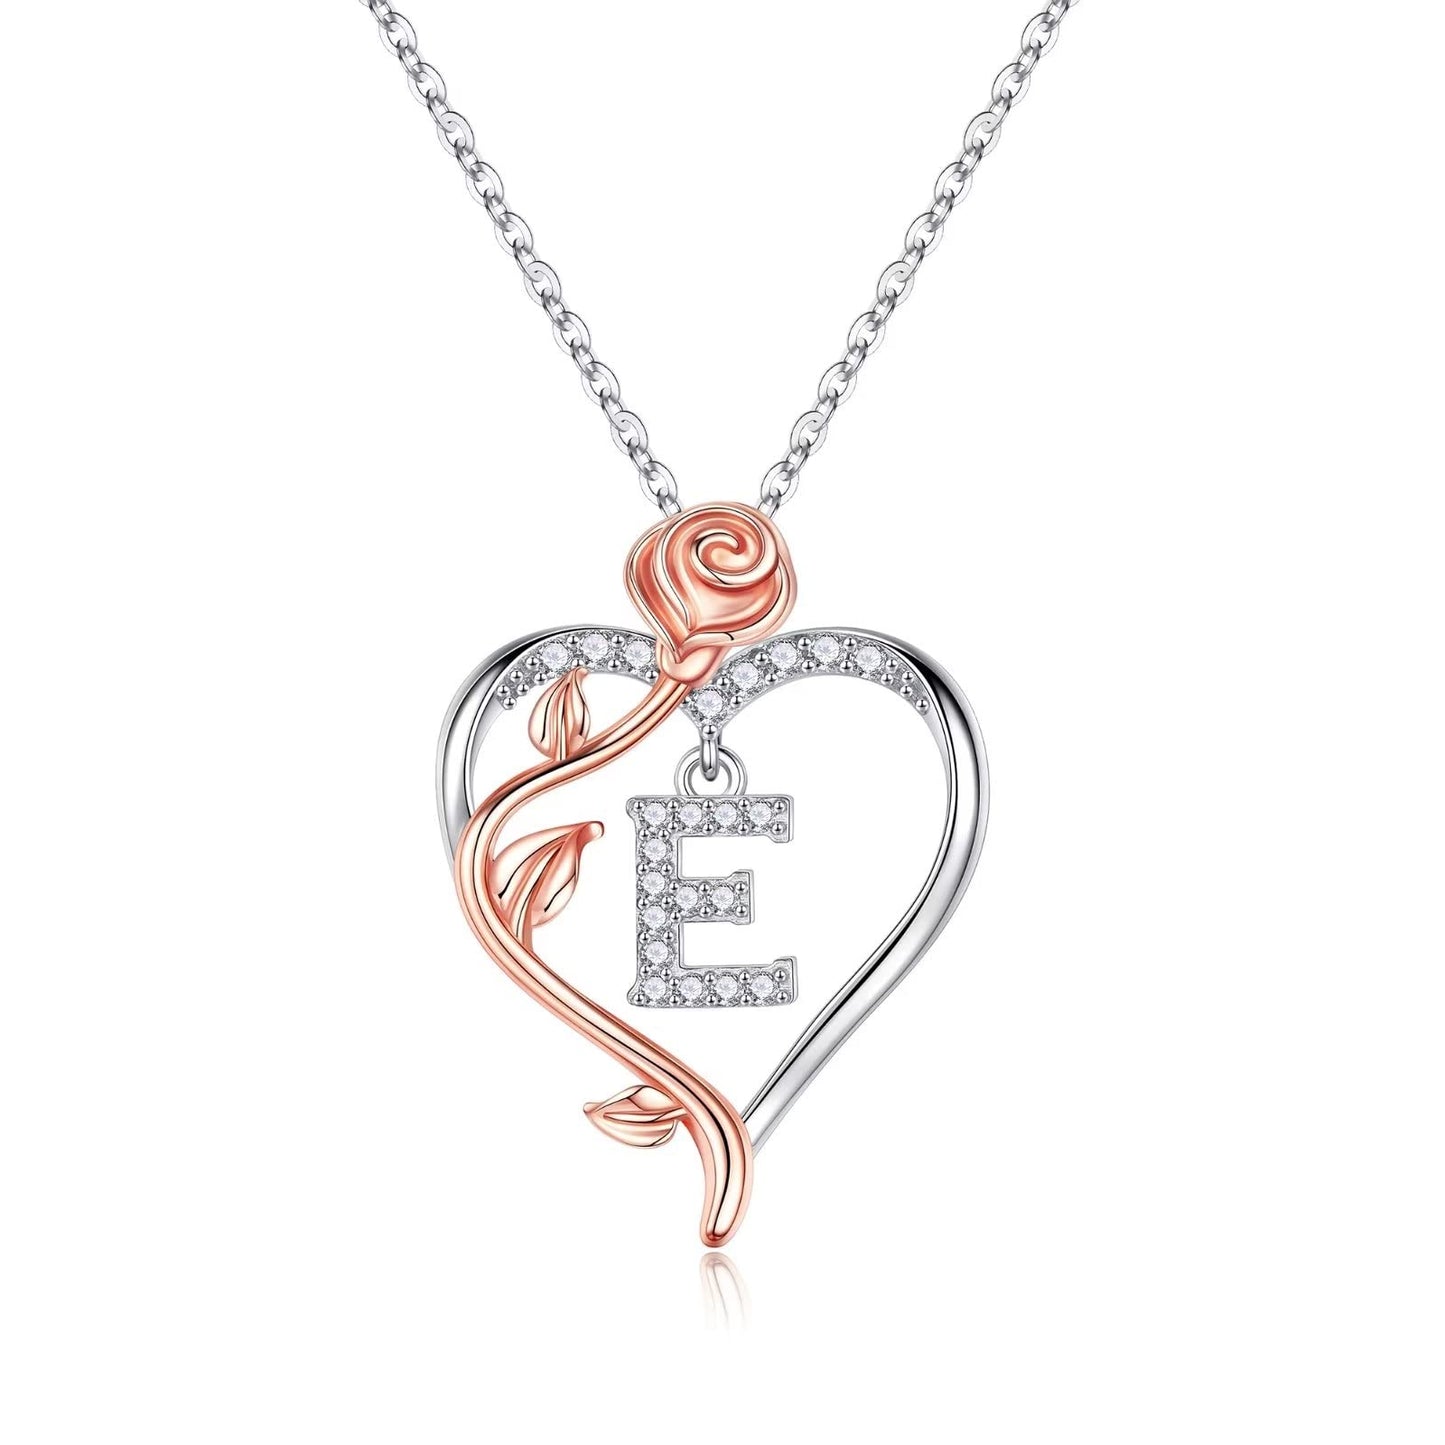 JSJOY Rose Heart Initial Necklaces Gifts for Women Teen Girls, Rose Love Heart Letter Pendant Necklace Jewelry Mothers Day Valentines Anniversary Birthday Gifts for Her Women Wife Girlfriend Mom